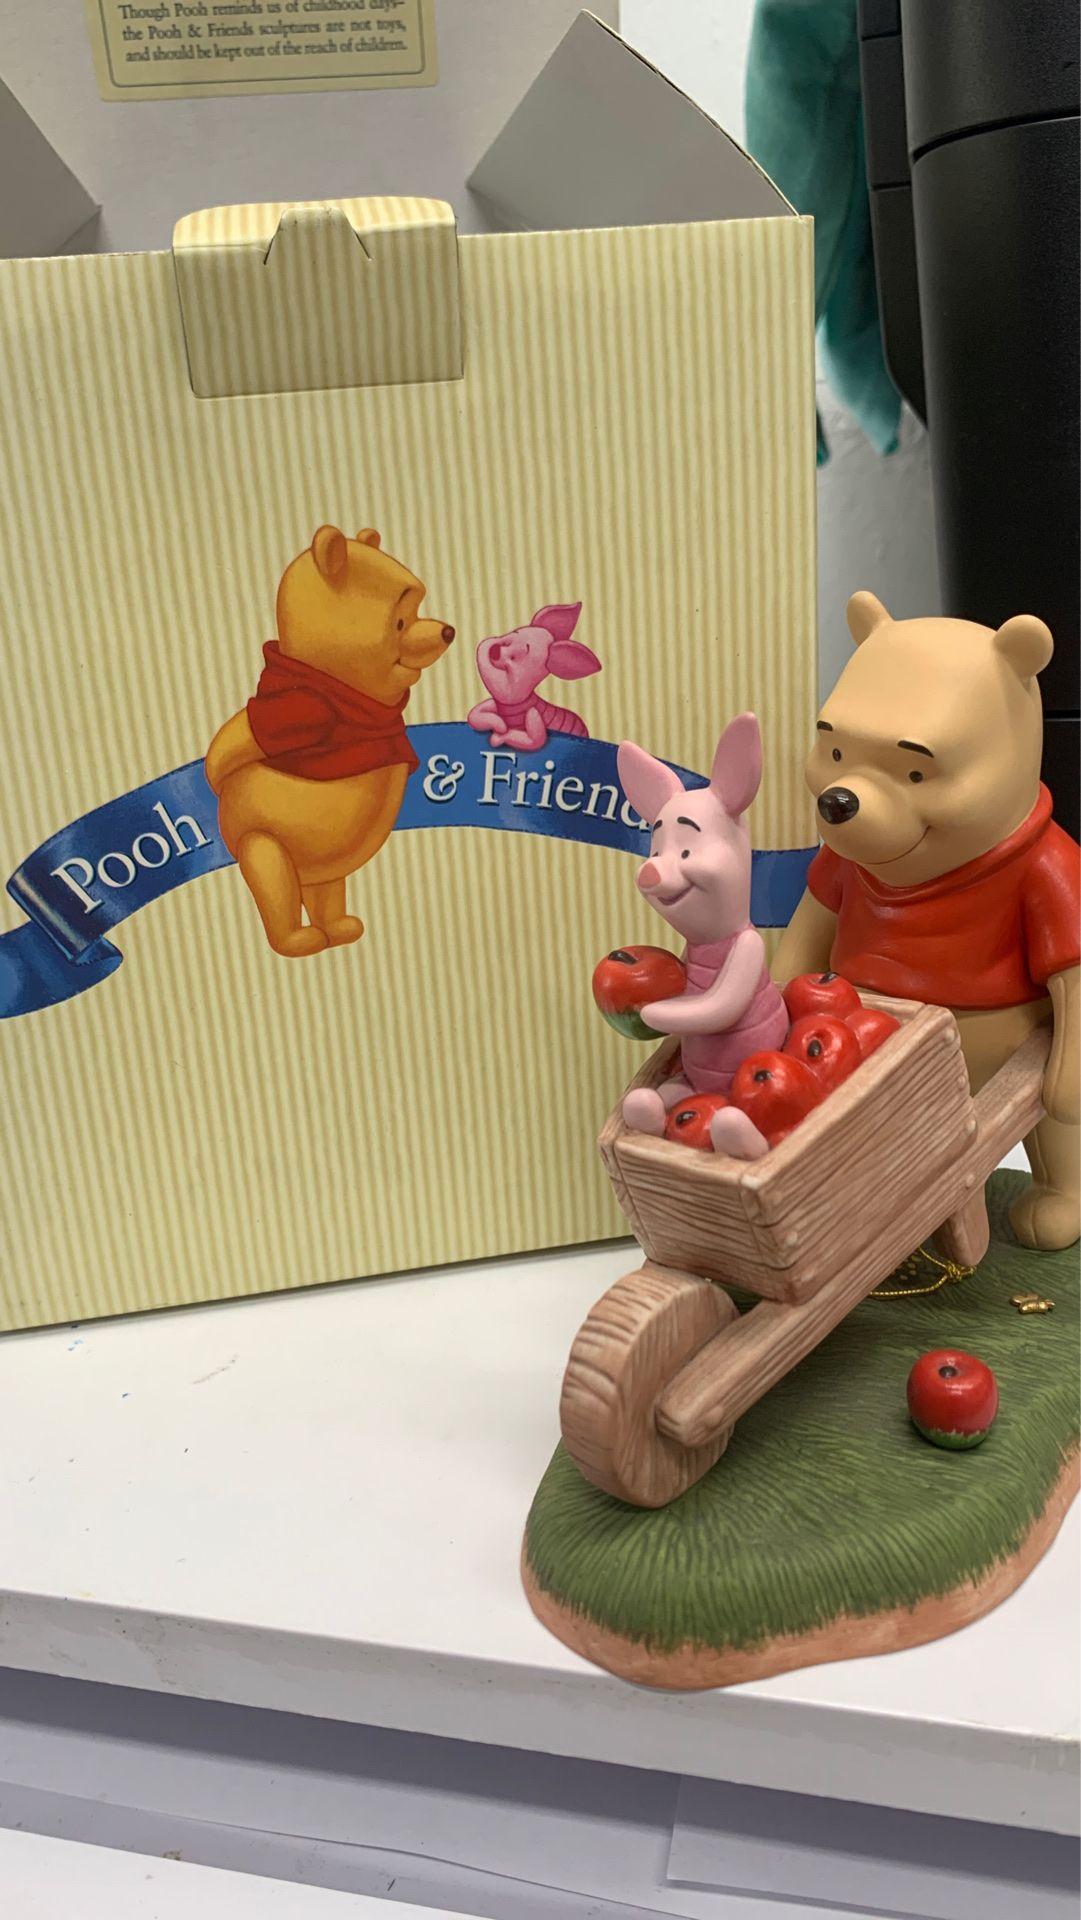 Pooh & friends